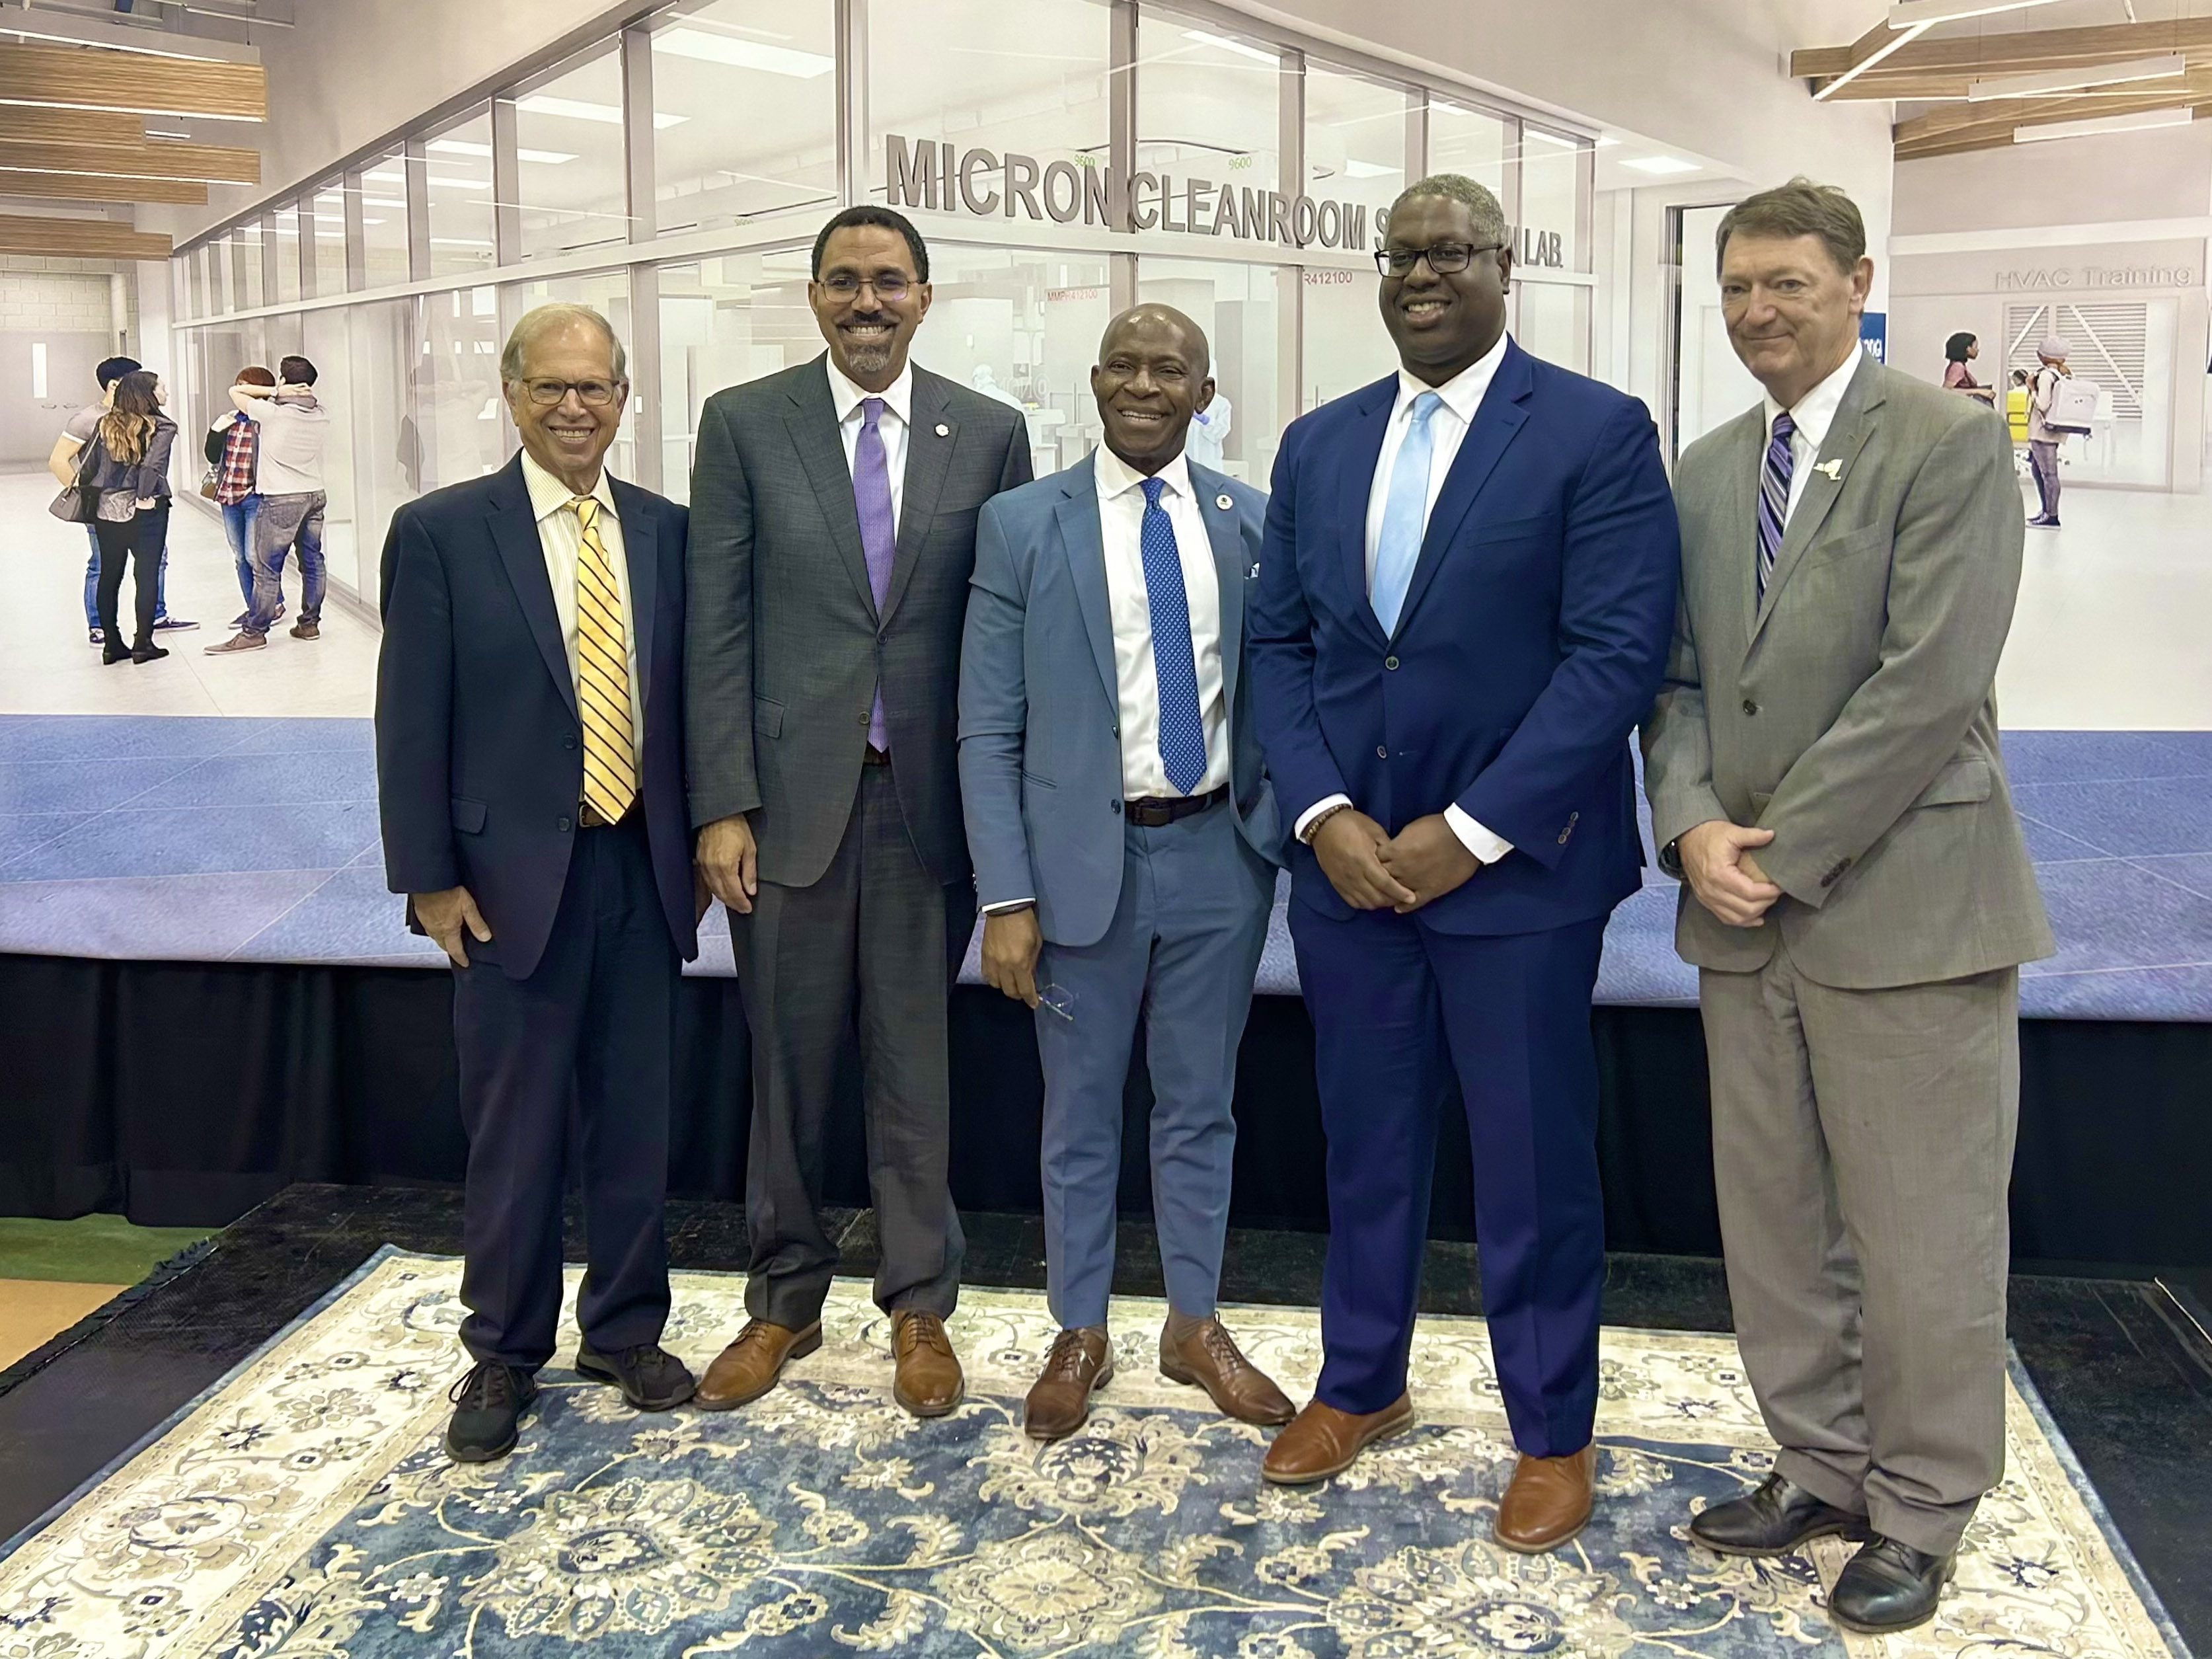 SUNY Oswego President Peter Nwosu was part of the Micron Cleanroom Simulation Laboratory renderings unveiling and media event with Micron global leadership team and New York State, local and community leaders at Onondaga Community College on Oct. 19. 